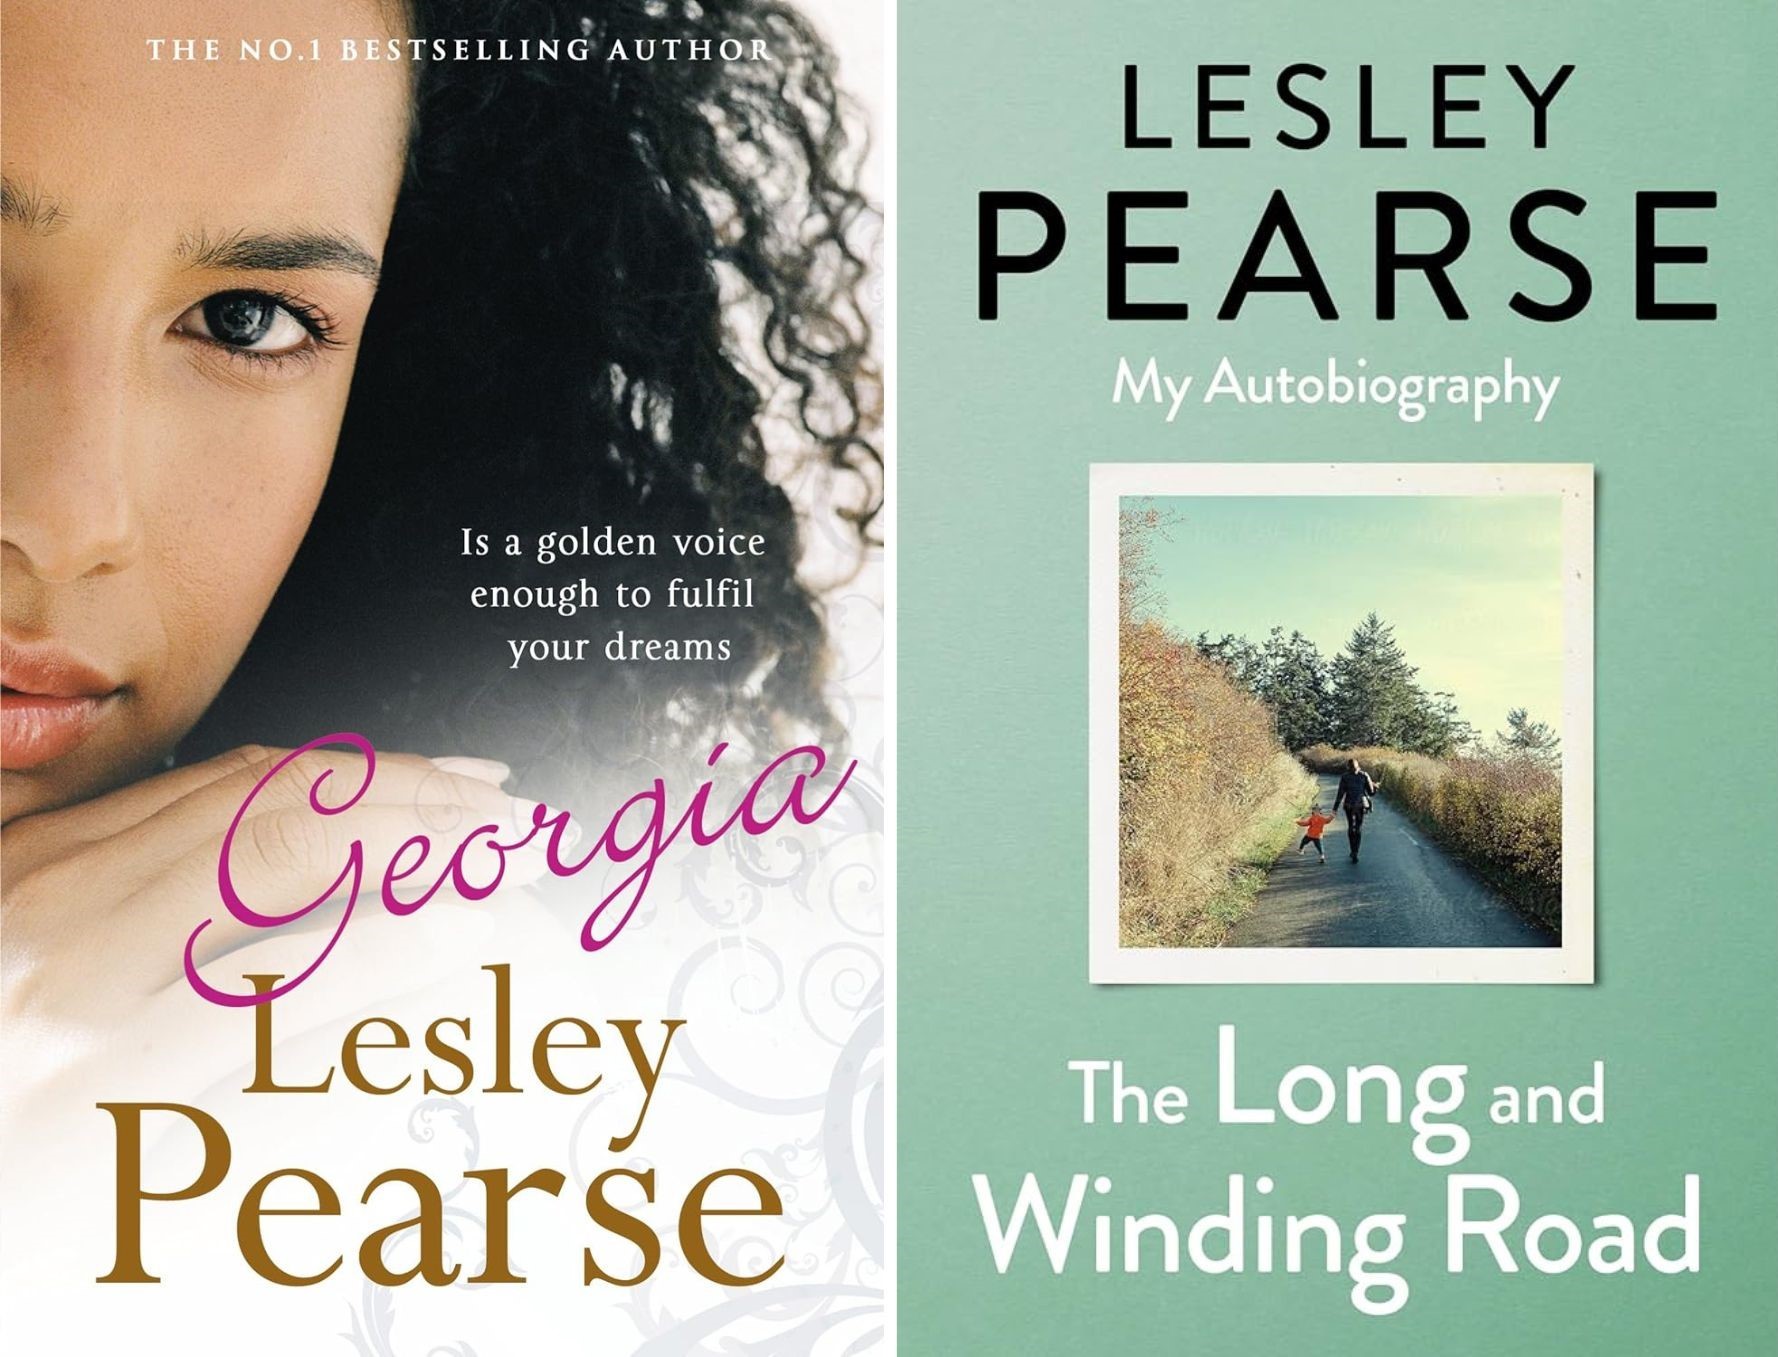 Titles by Author of the Month, Lesley Pearse.